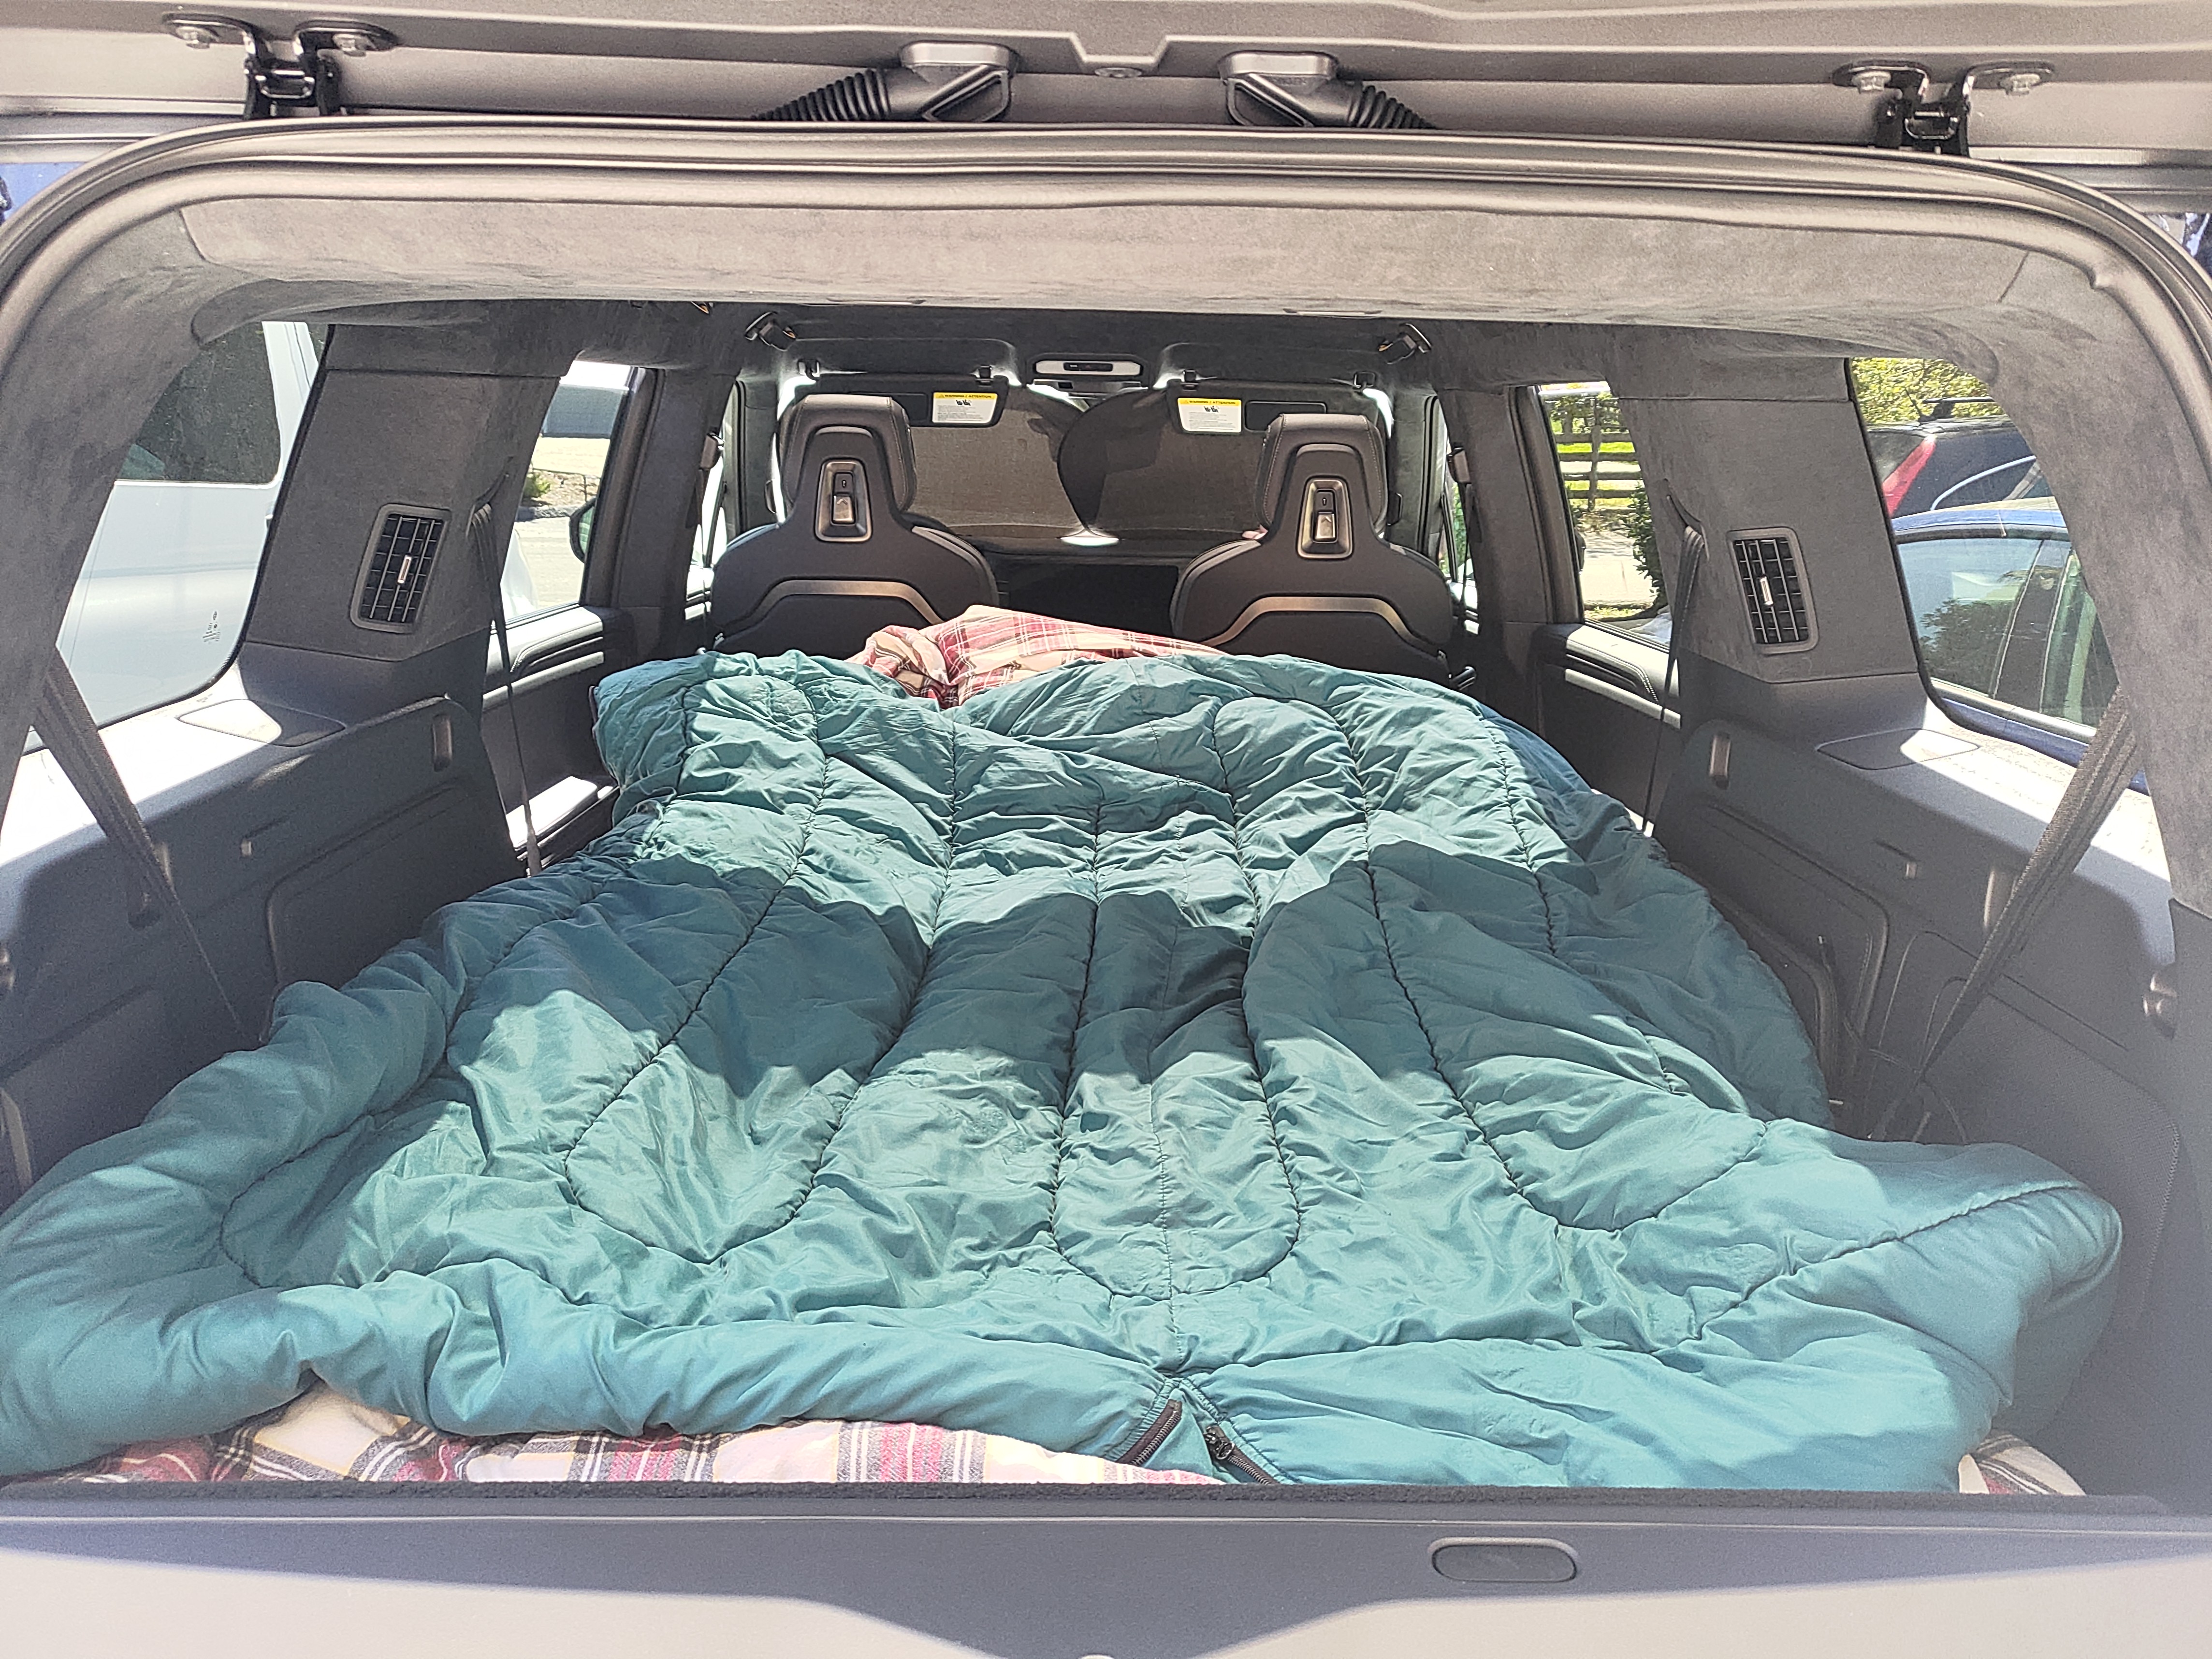 My bed in the rivian